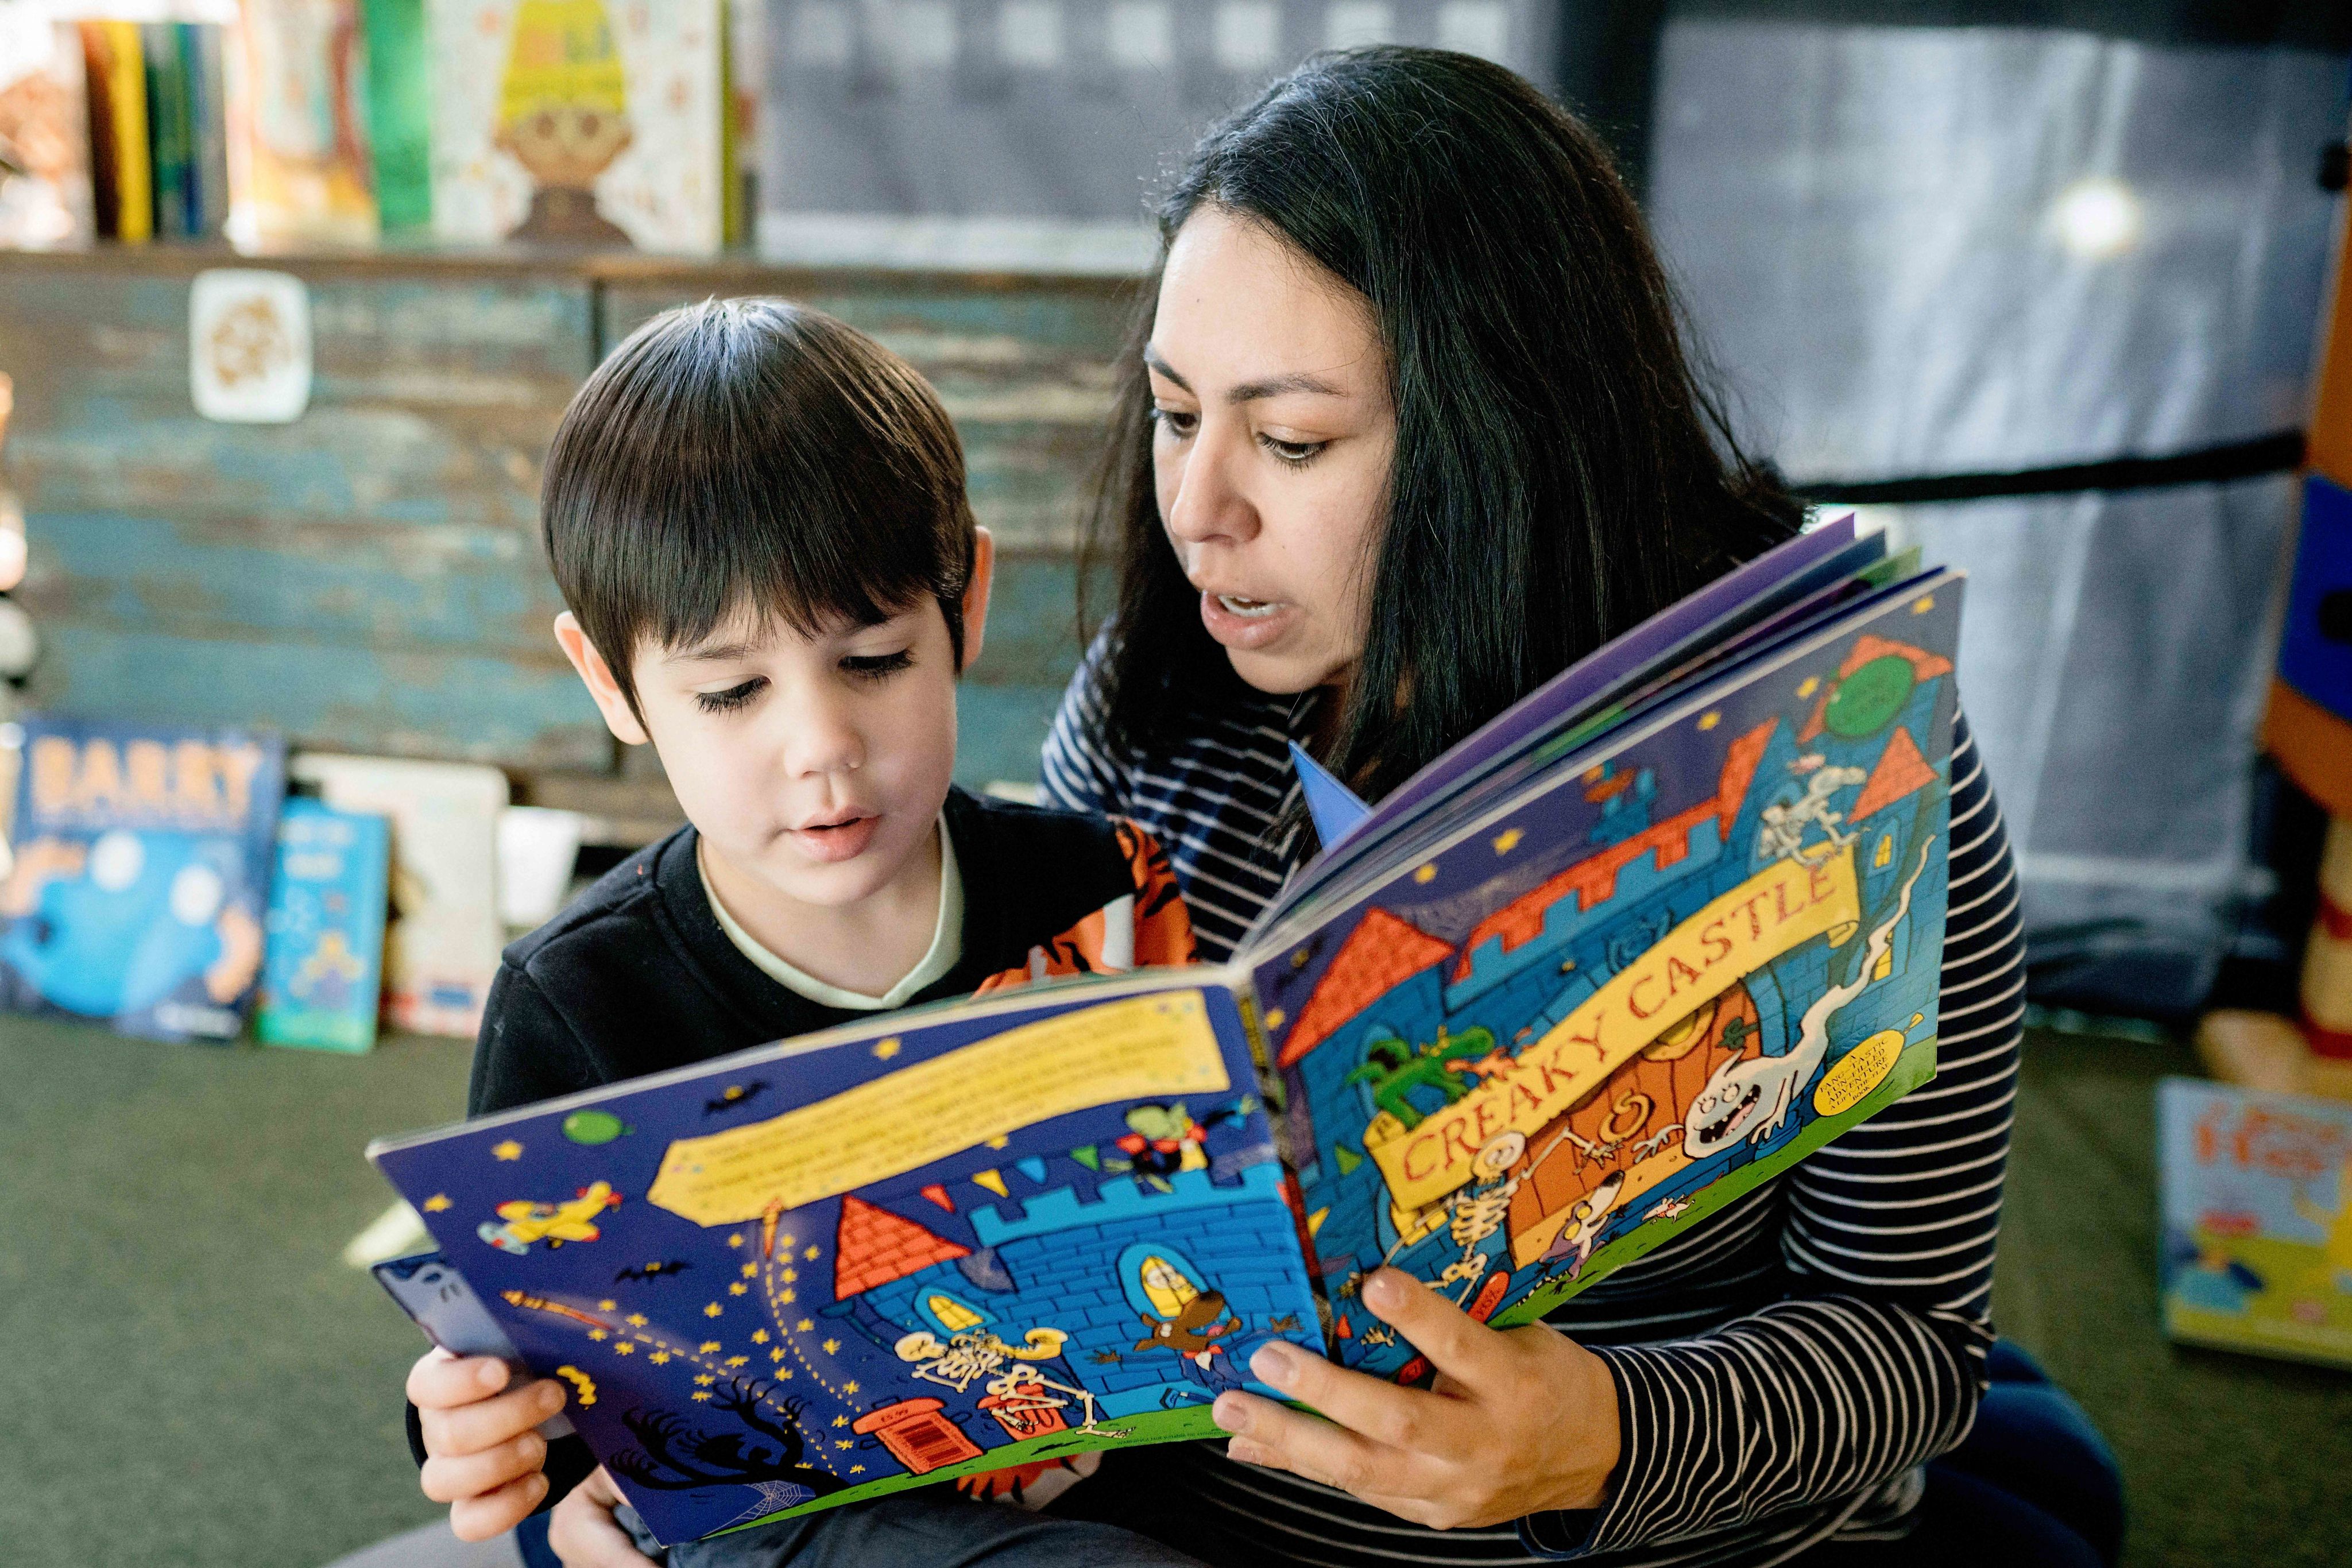 A child and adult reading together